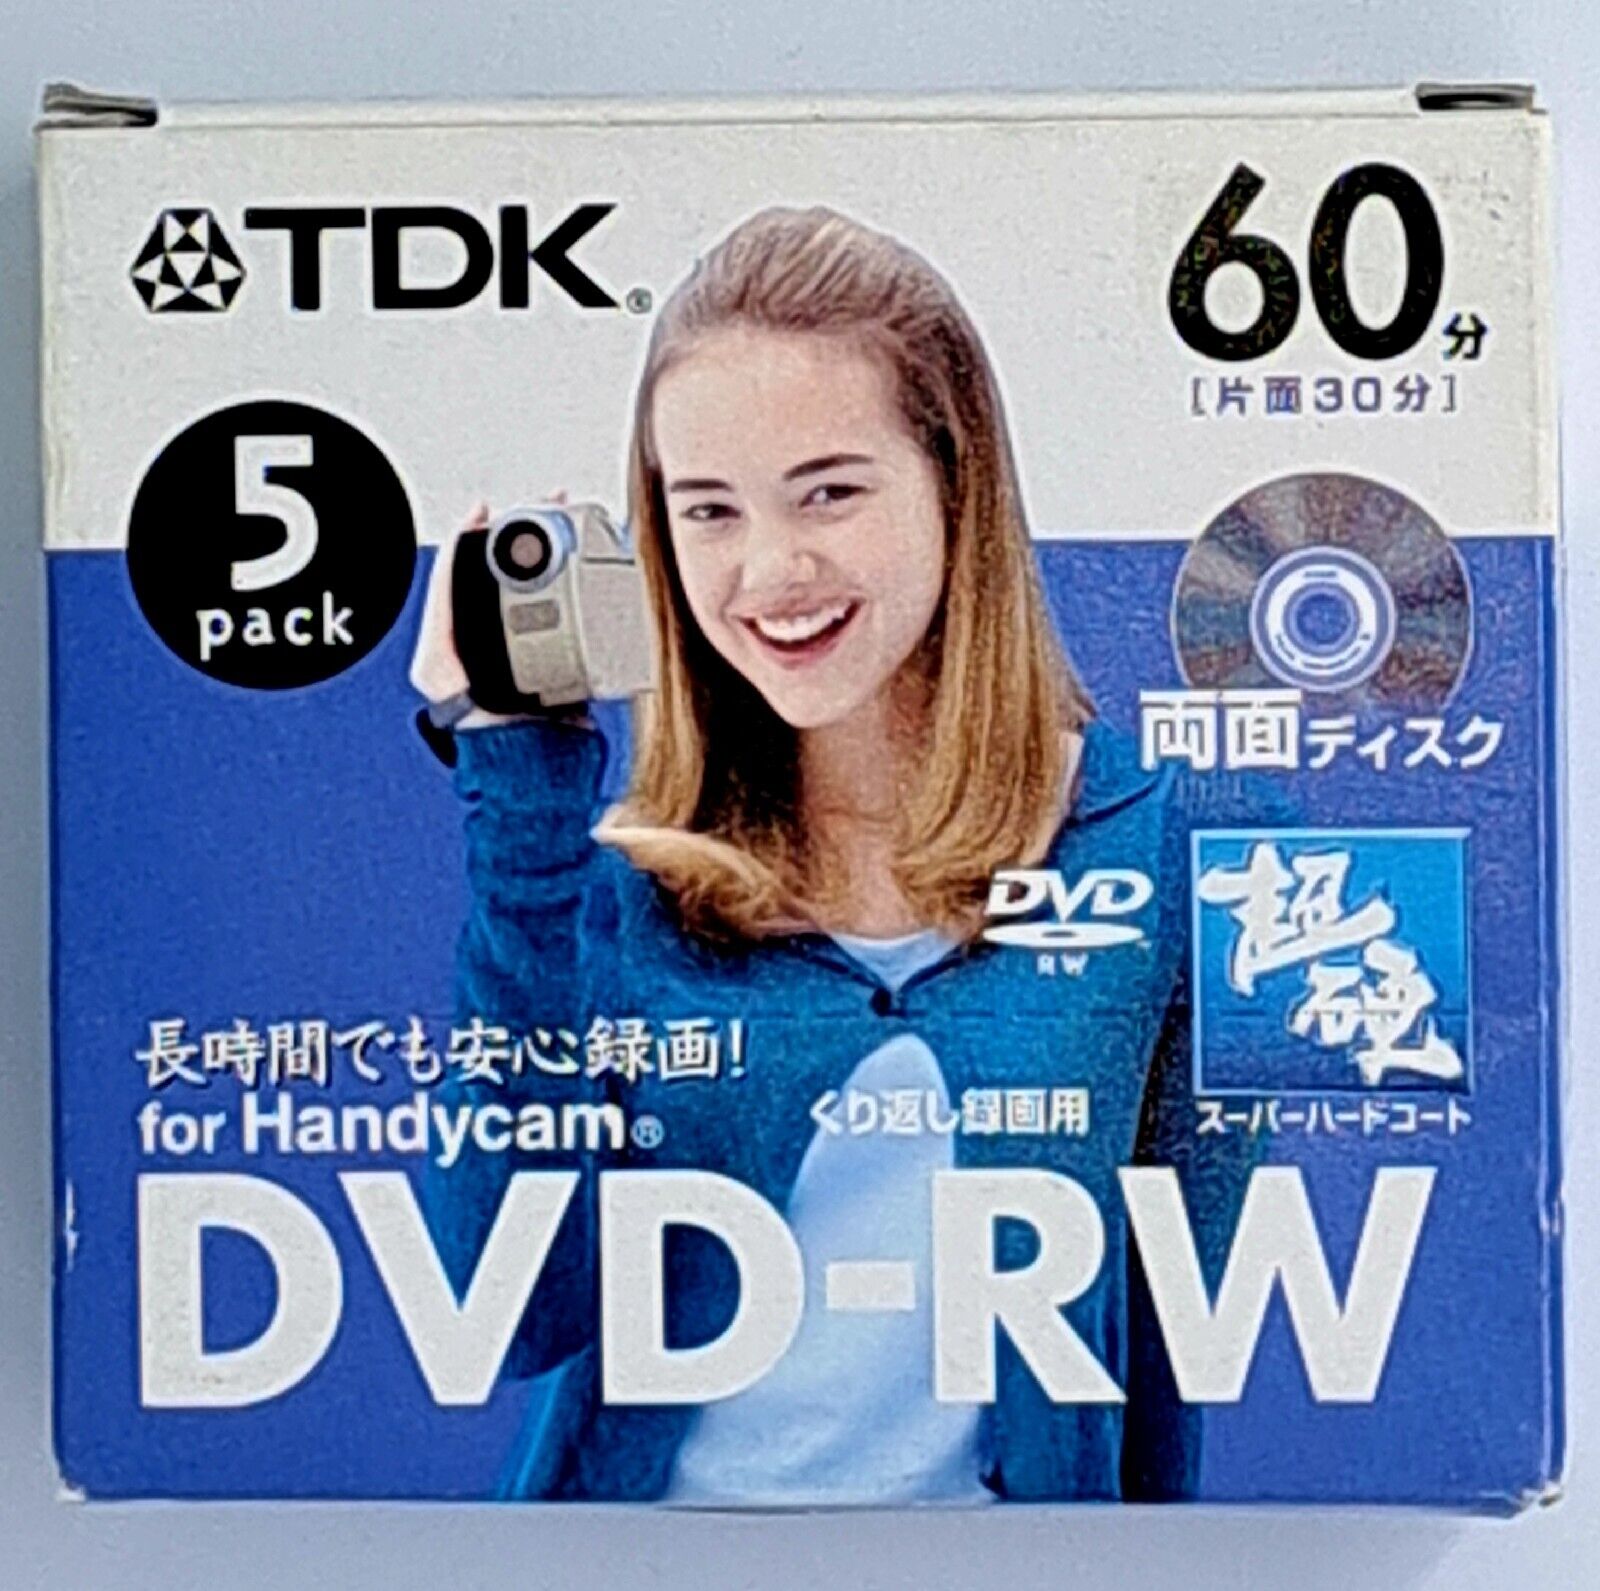 NEW VINTAGE TDK DVD-RW For Handycam 60 minute 2.8 GB  Box of 5 Sealed FAST SHIP